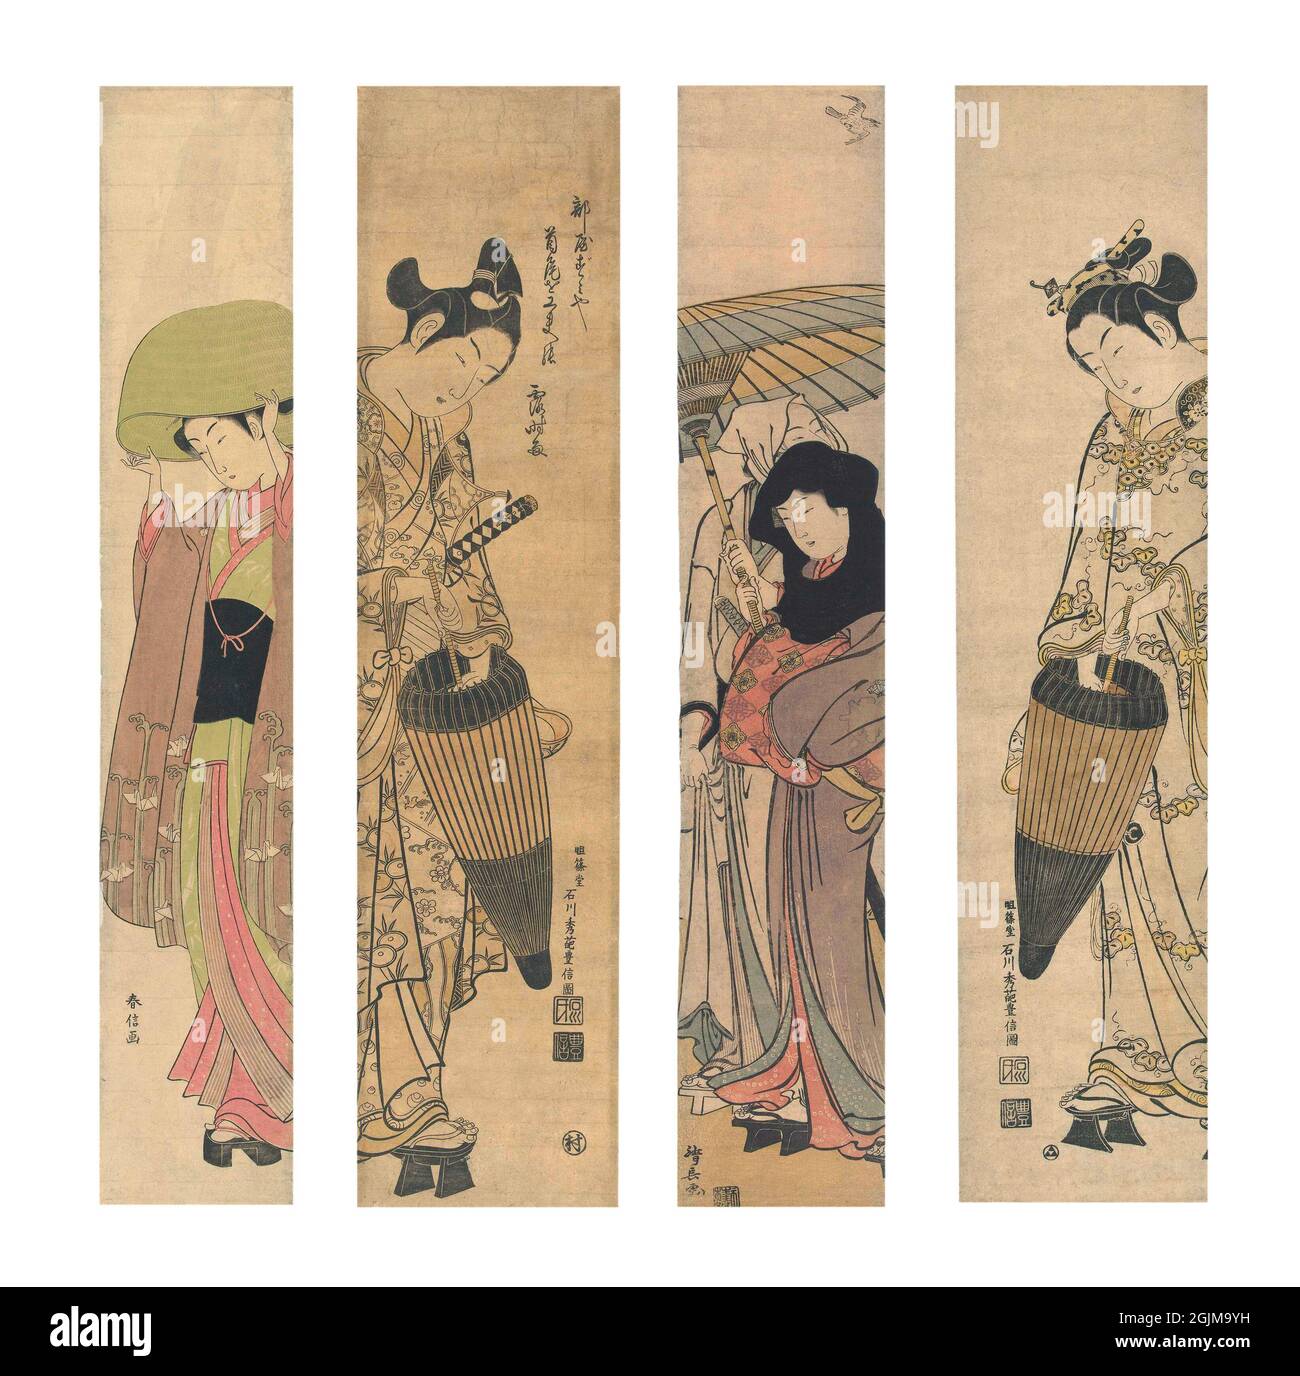 Selection of 4 Japanese painted woodcuts from left to right:  1. Girl putting on a straw hat, wearing a kimono with pattern of origami cranes and stylized waves.= (1765-70) 2. Young man in raincoat with stylised floral patterns, with sword, opening a downward-facing umbrella (1740-45) 3. Ochiya and her husband Hanbei, looking up at a cuckoo, under an umbrella. (1780 - 1784)  4. Woman in raincoat with stylized butterfly pattern, opening downward facing umbrella.  Unique optimised and enhanced arrangement of four eighteenth century Japanese woodcut illustrations. Stock Photo